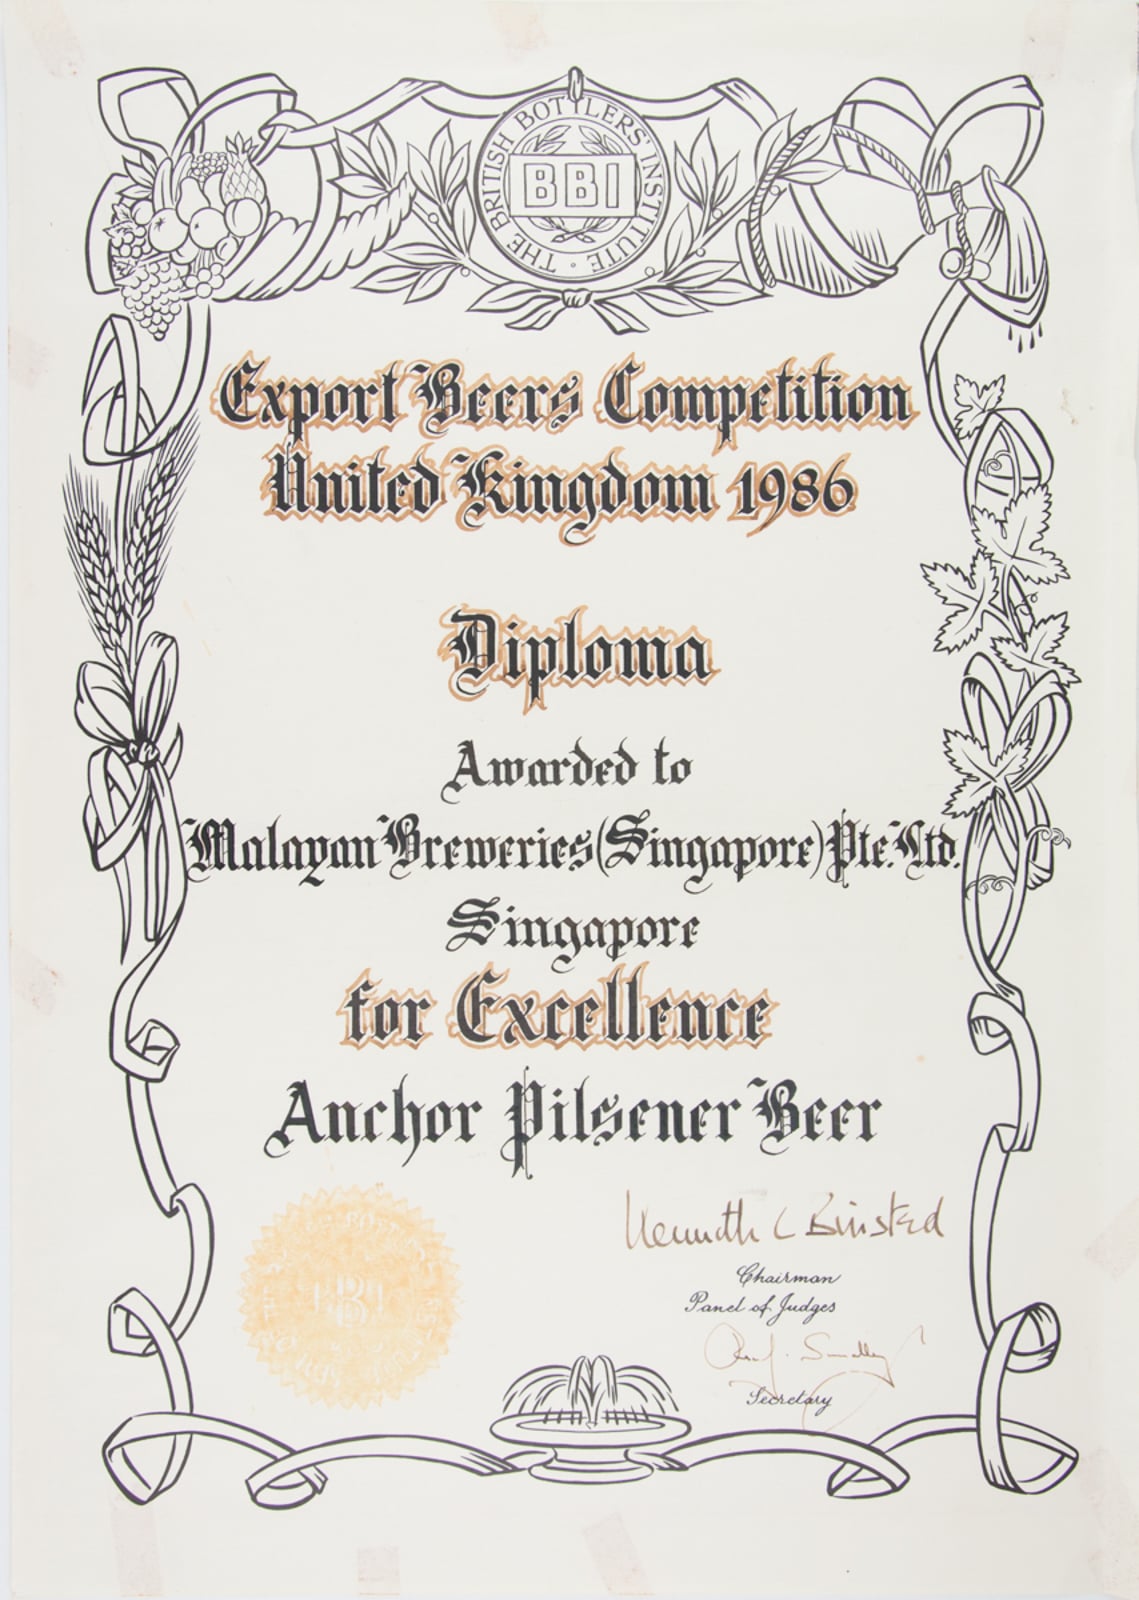 Anchor Pilsener Beer - Diploma for Excellence, Export Beers Competition United Kingdom Certificate 1986